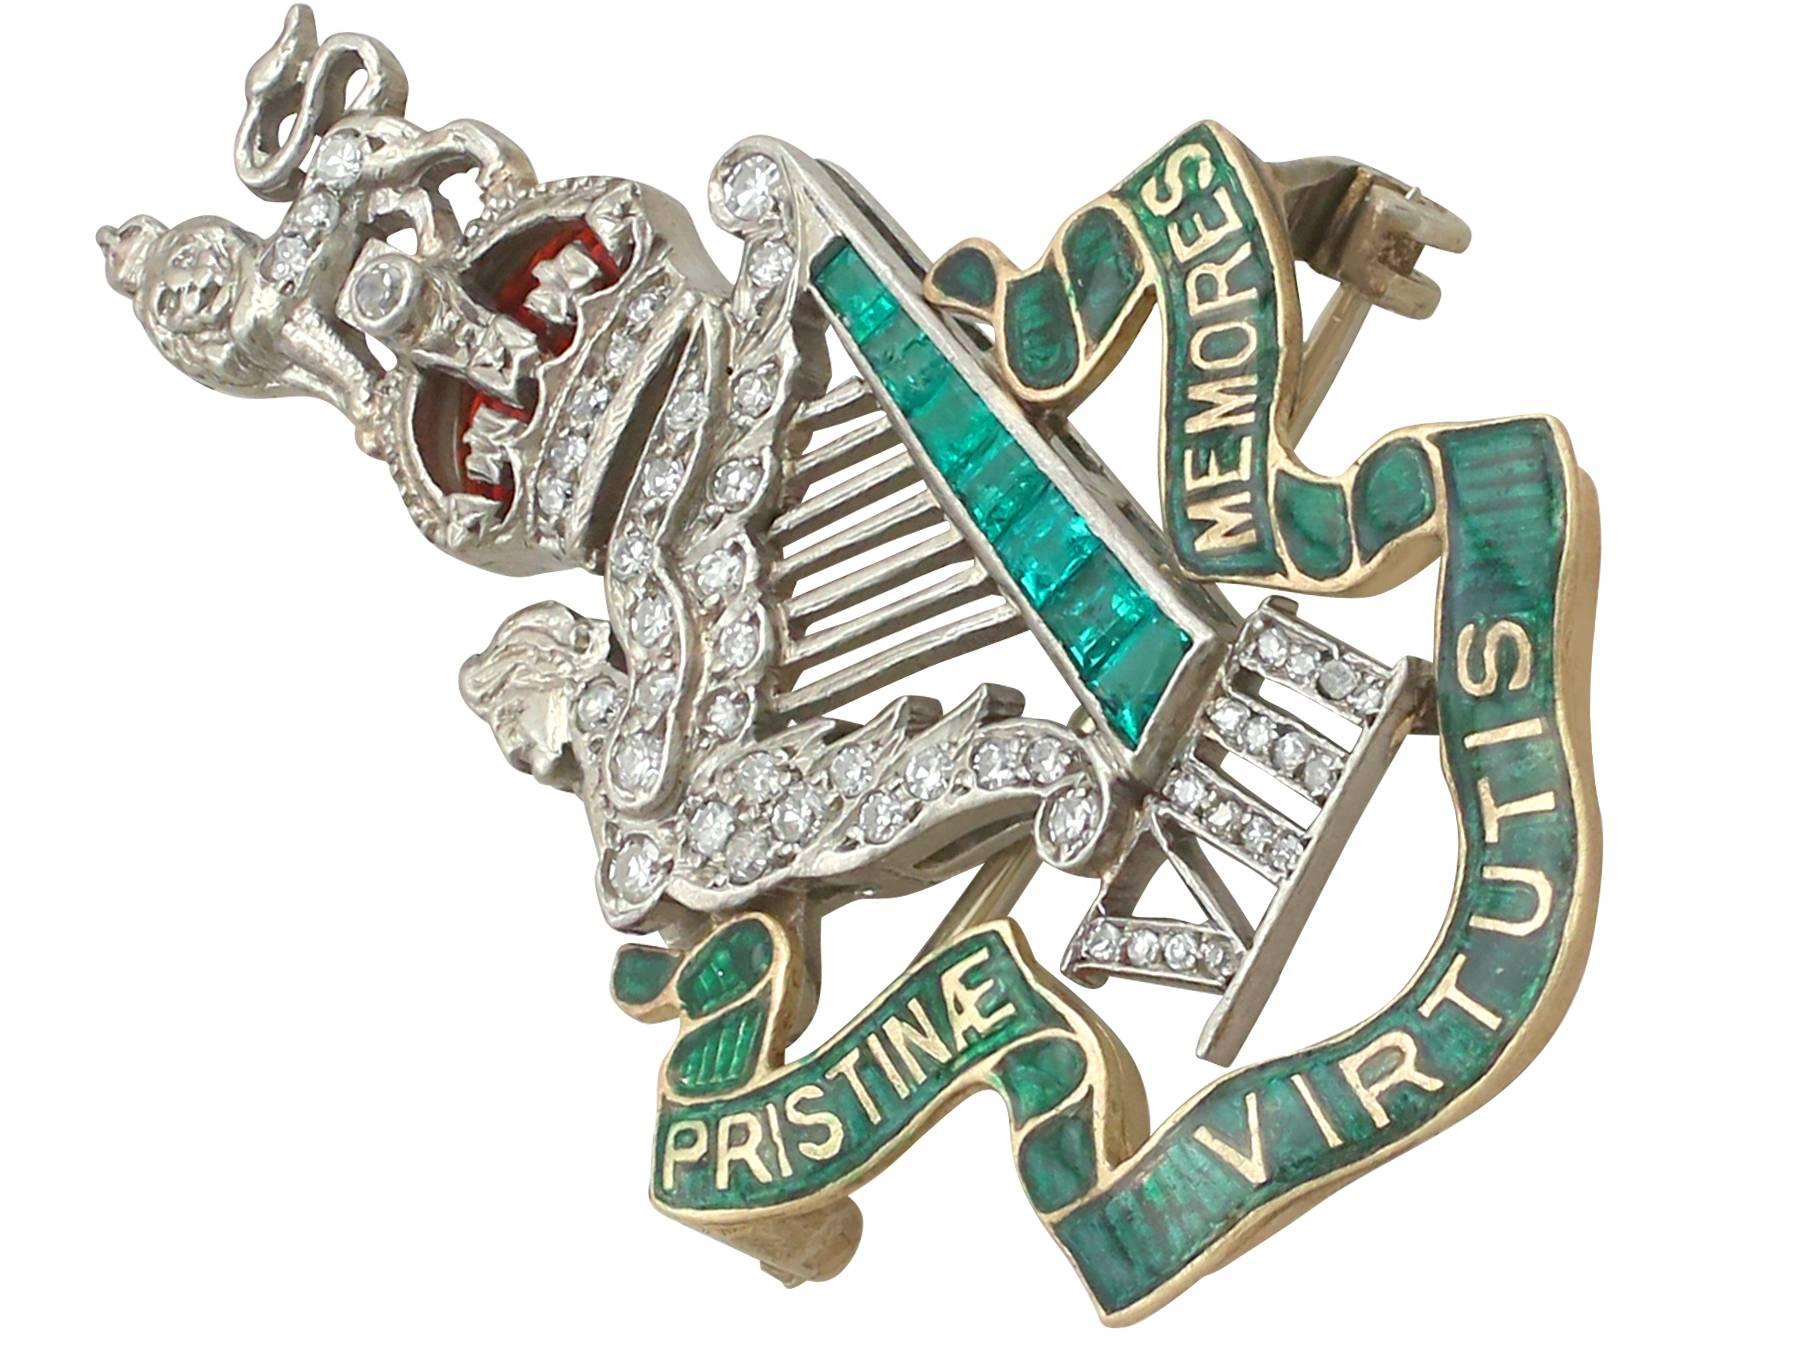 An impressive antique 0.28 carat diamond and 0.16 carat emerald, 14 karat yellow gold and platinum regimental brooch; part of our diverse antique jewellery collections.

This fine and impressive antique military brooch has been crafted in 14k yellow